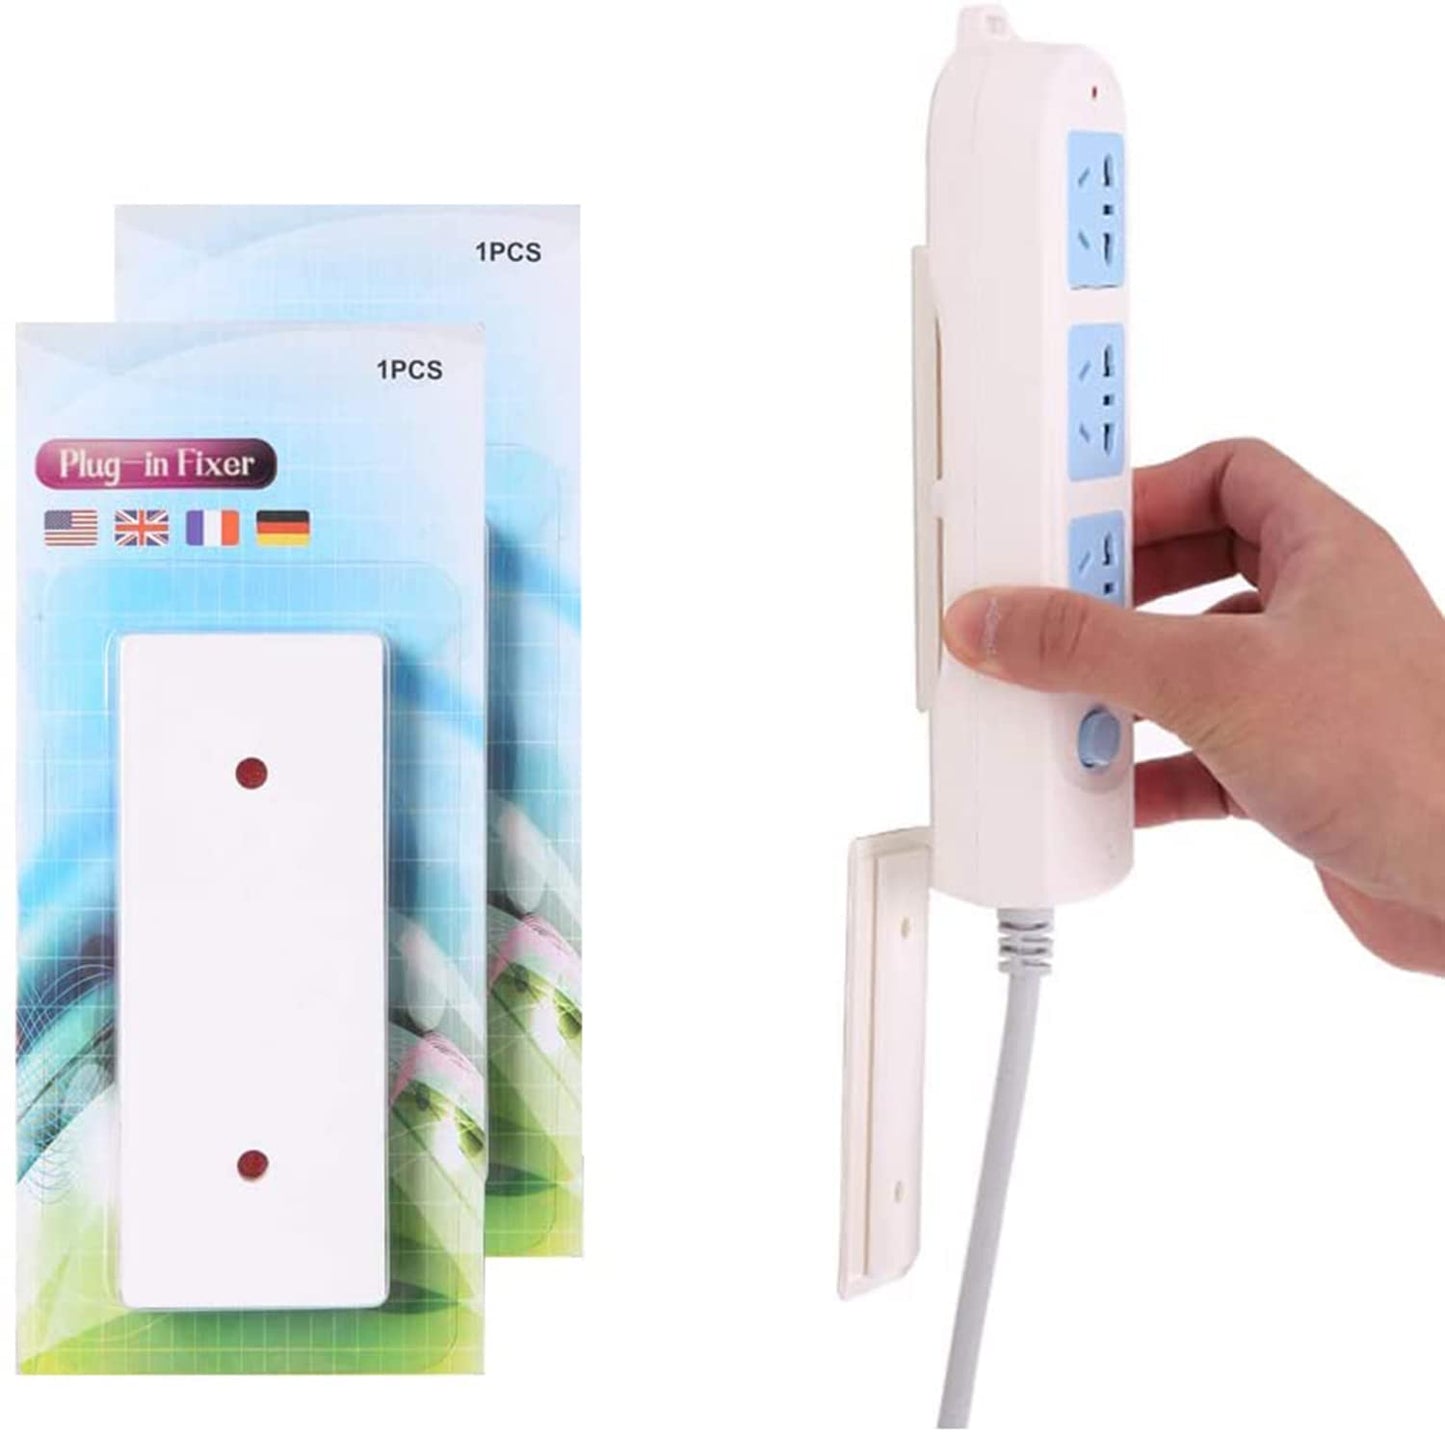 Power Strip Holder Fixator, No Hole Plug-in, Loading 10Kg Maximum, for WiFi Router, Remote Control, etc.